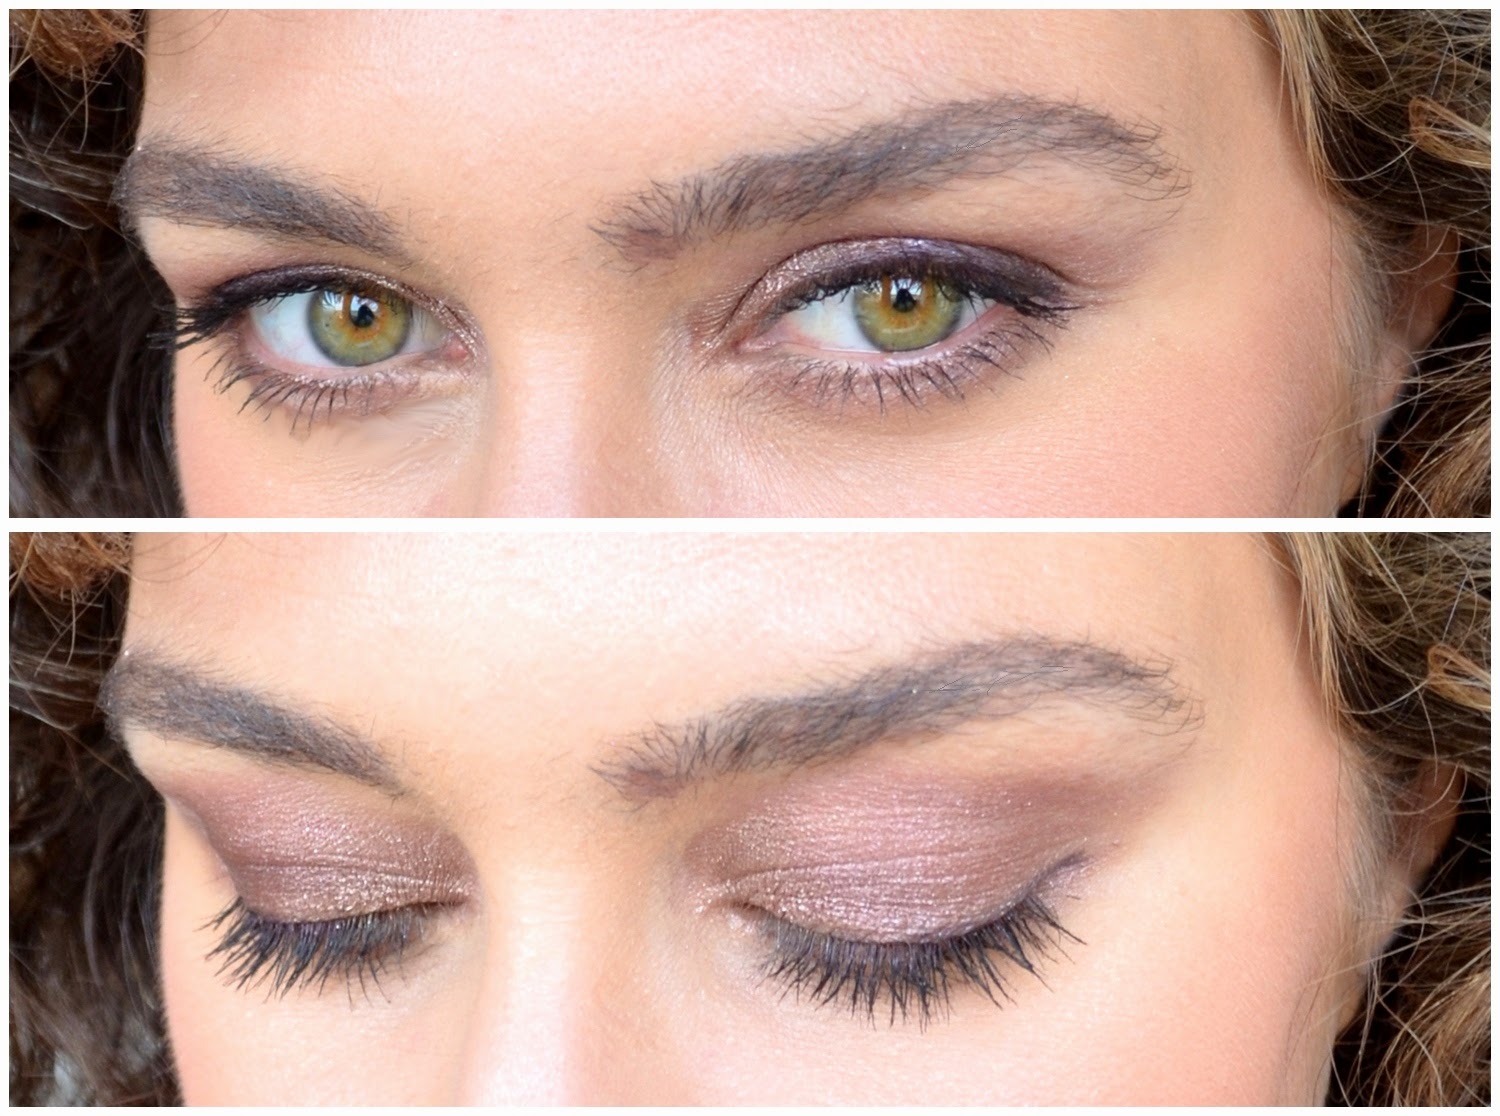 Eyeshadow love: Chanel Illusion d'ombre 837 Fatal & EOTD / Polished Polyglot